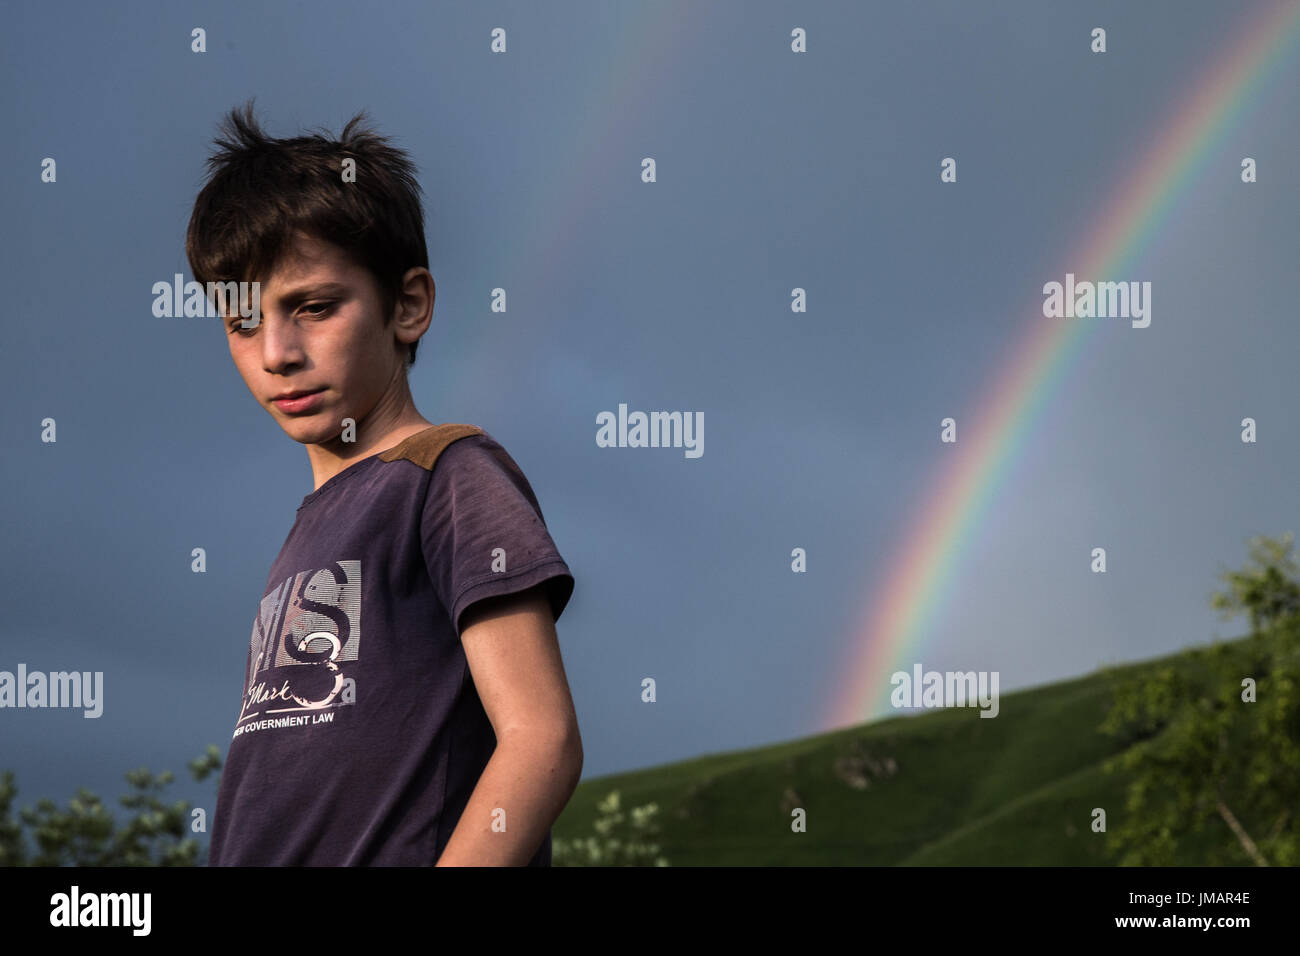 Chechnya, Russia. 25th July, 2017. A boy walks in front of a rainbow in Vedensky District, Chechnya, Russia, on July 25, 2017. Credit: Bai Xueqi/Xinhua/Alamy Live News Stock Photo